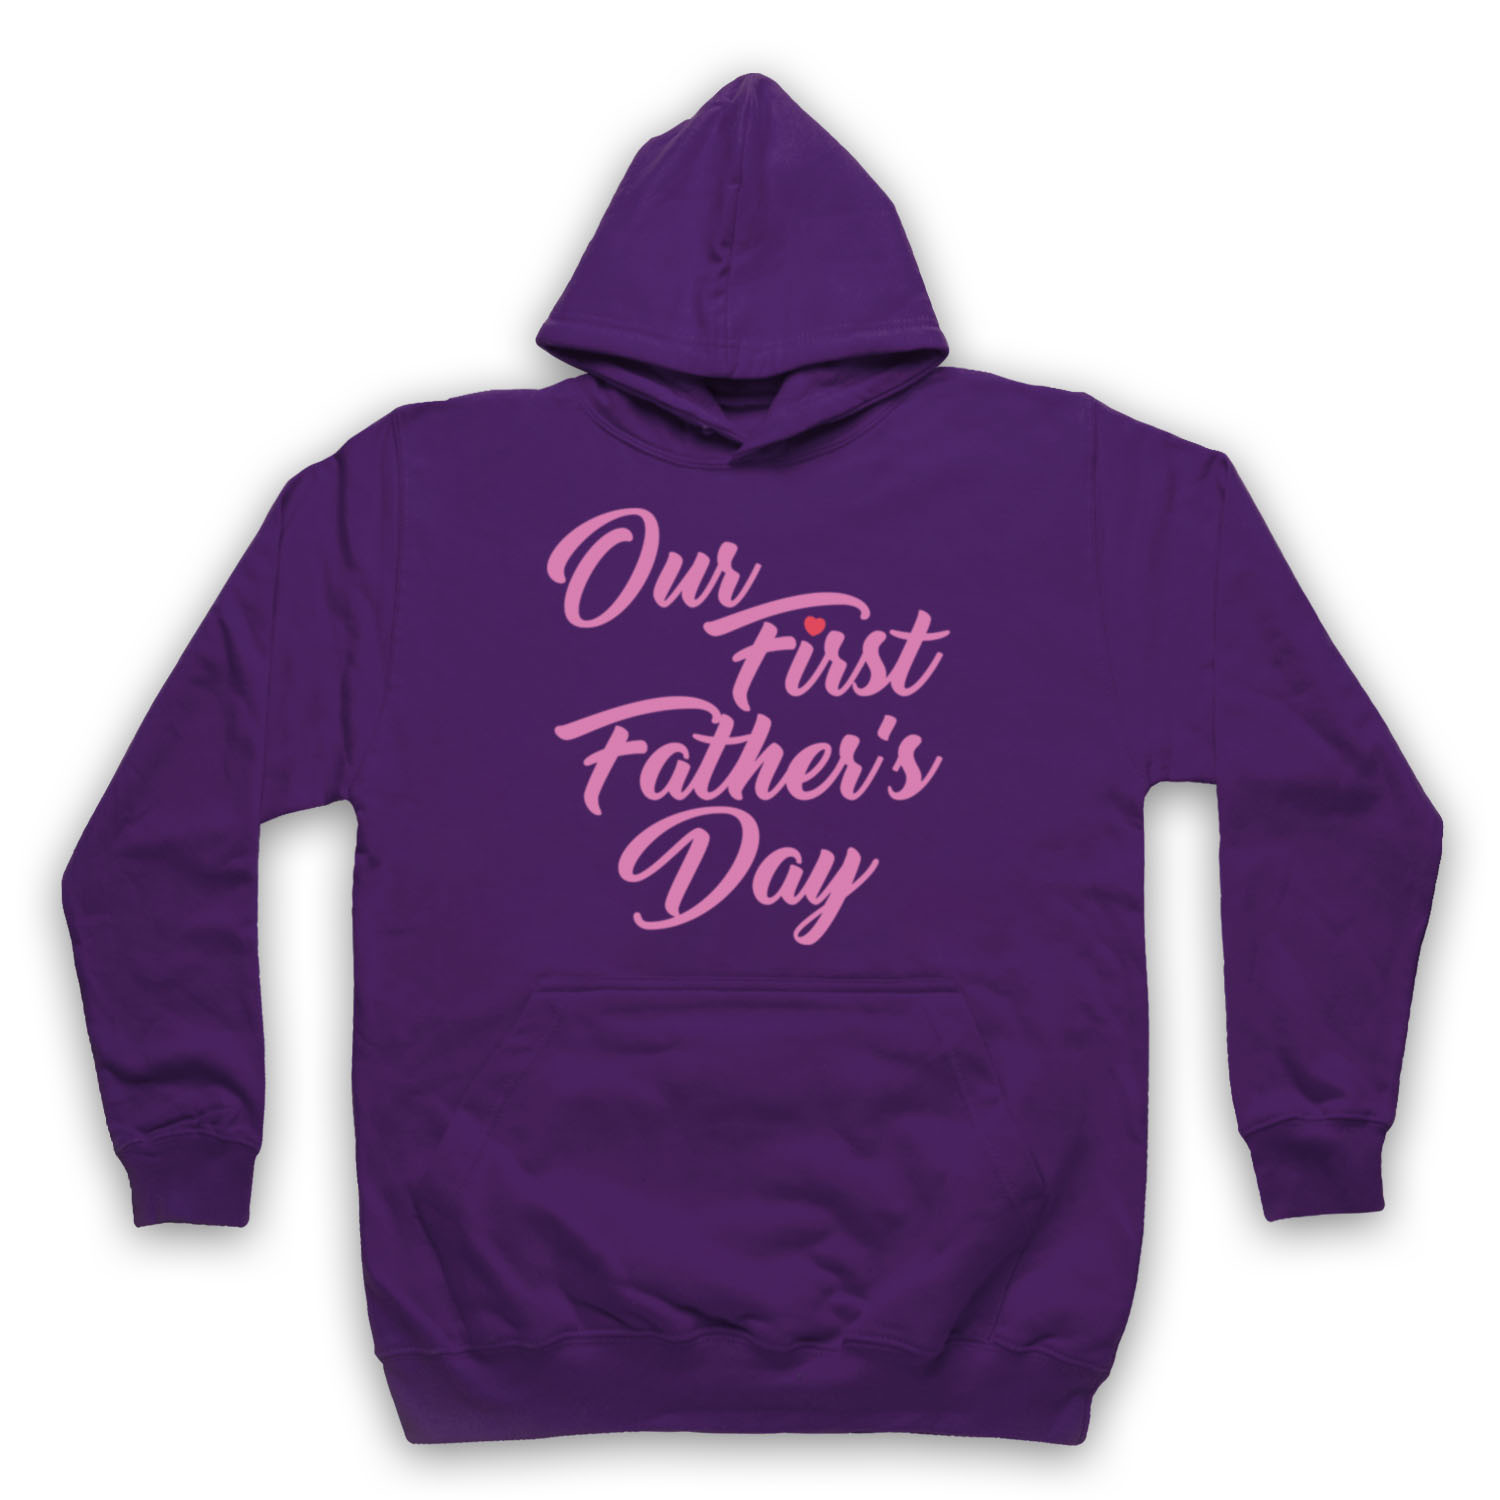 Father'S Day Gifts From Kids
 OUR FIRST FATHER S DAY BABY DAUGHTER COOL CUTE GIFT ADULTS